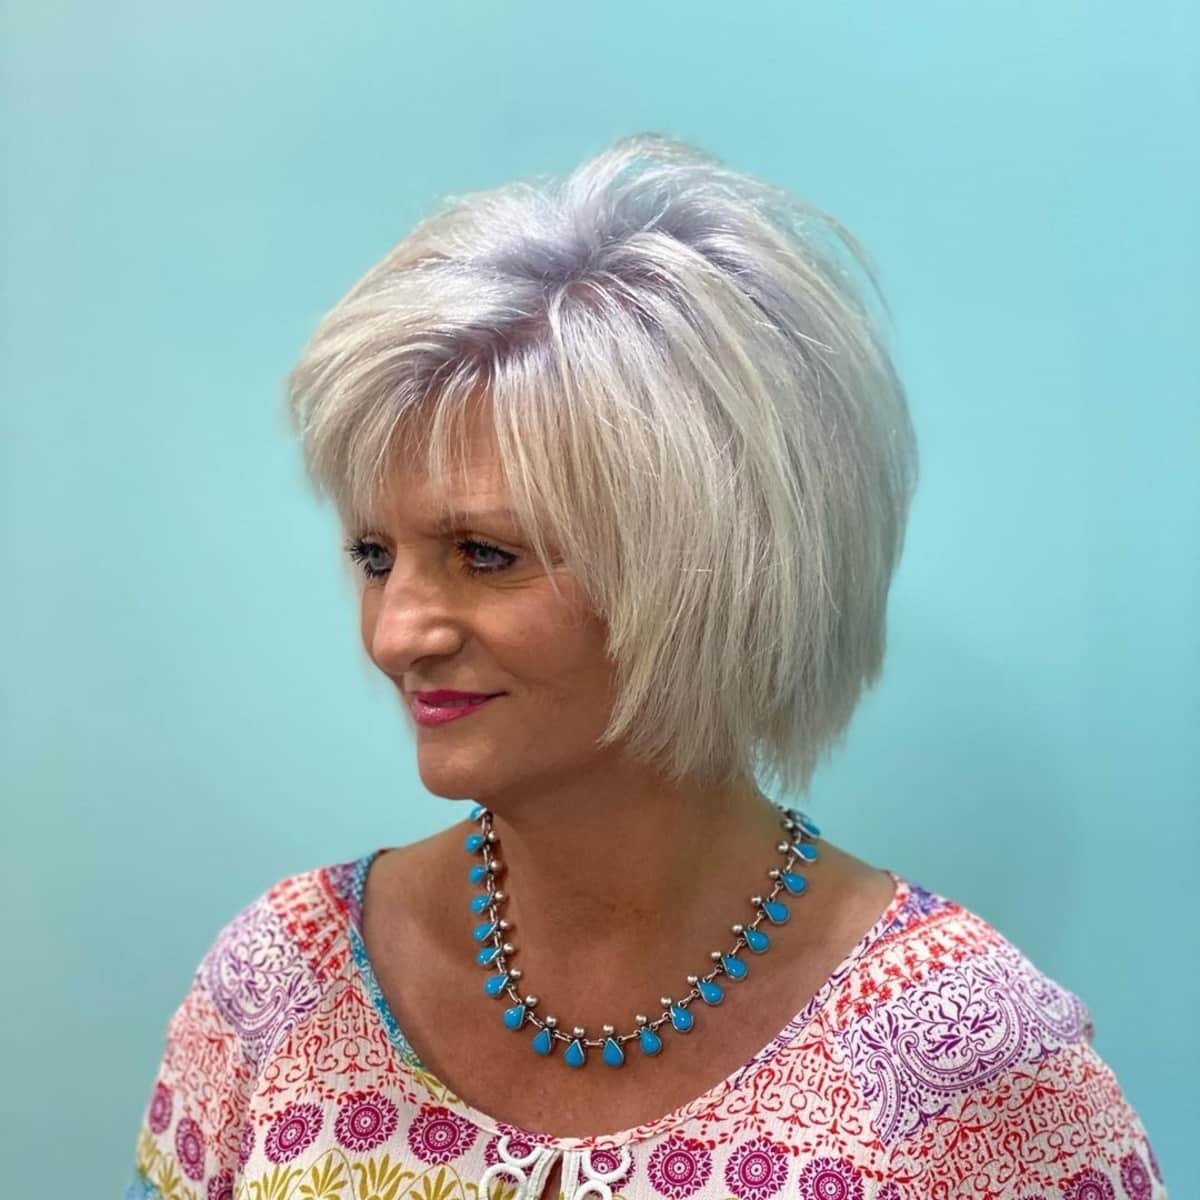 The 45 Most Youthful Short Hairstyles for Women Over 50